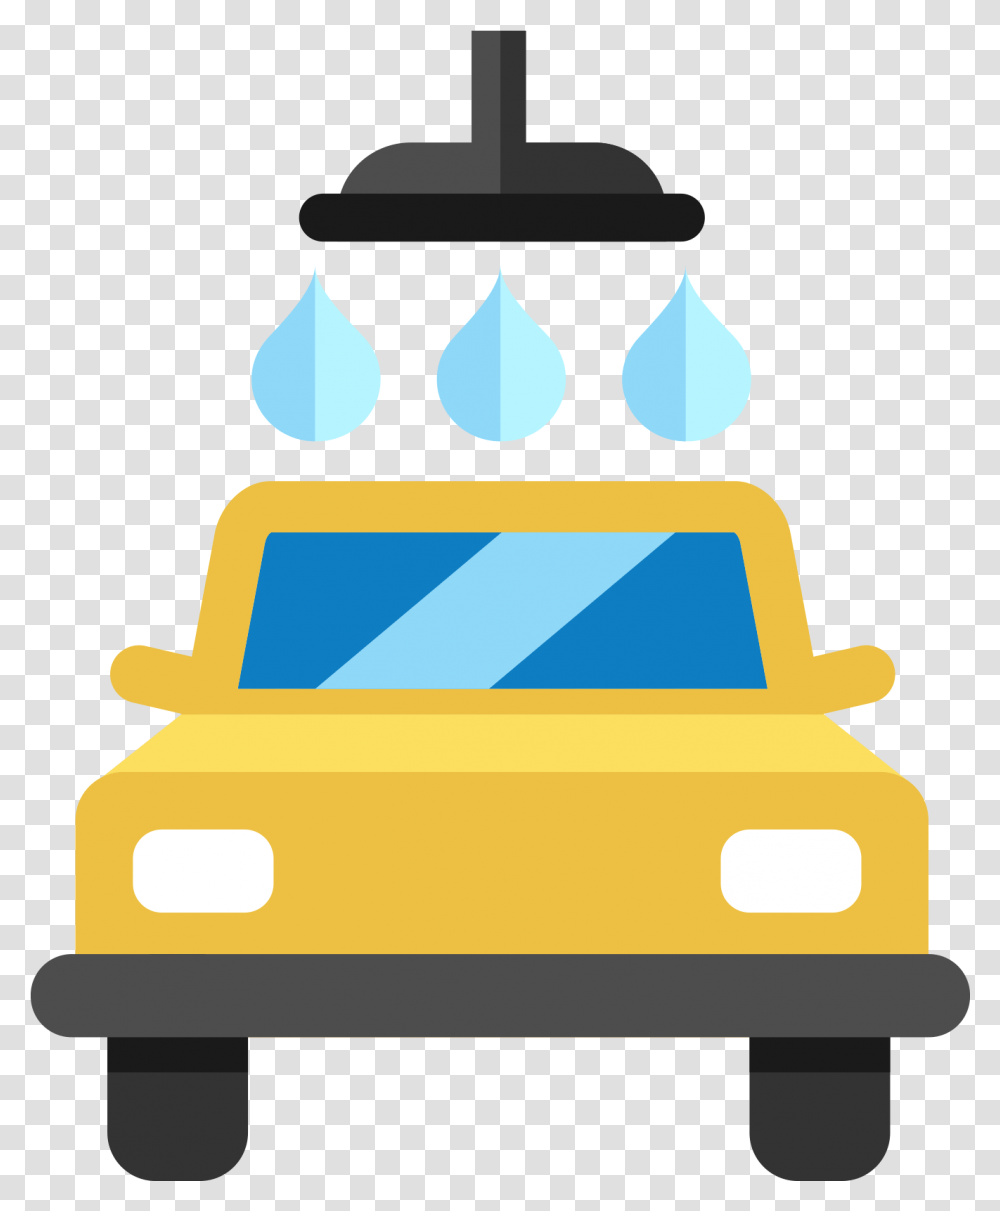 The Works Wash Car Washing Icon Clipart Full Size Car Wash, Vehicle, Transportation, Automobile, Taxi Transparent Png